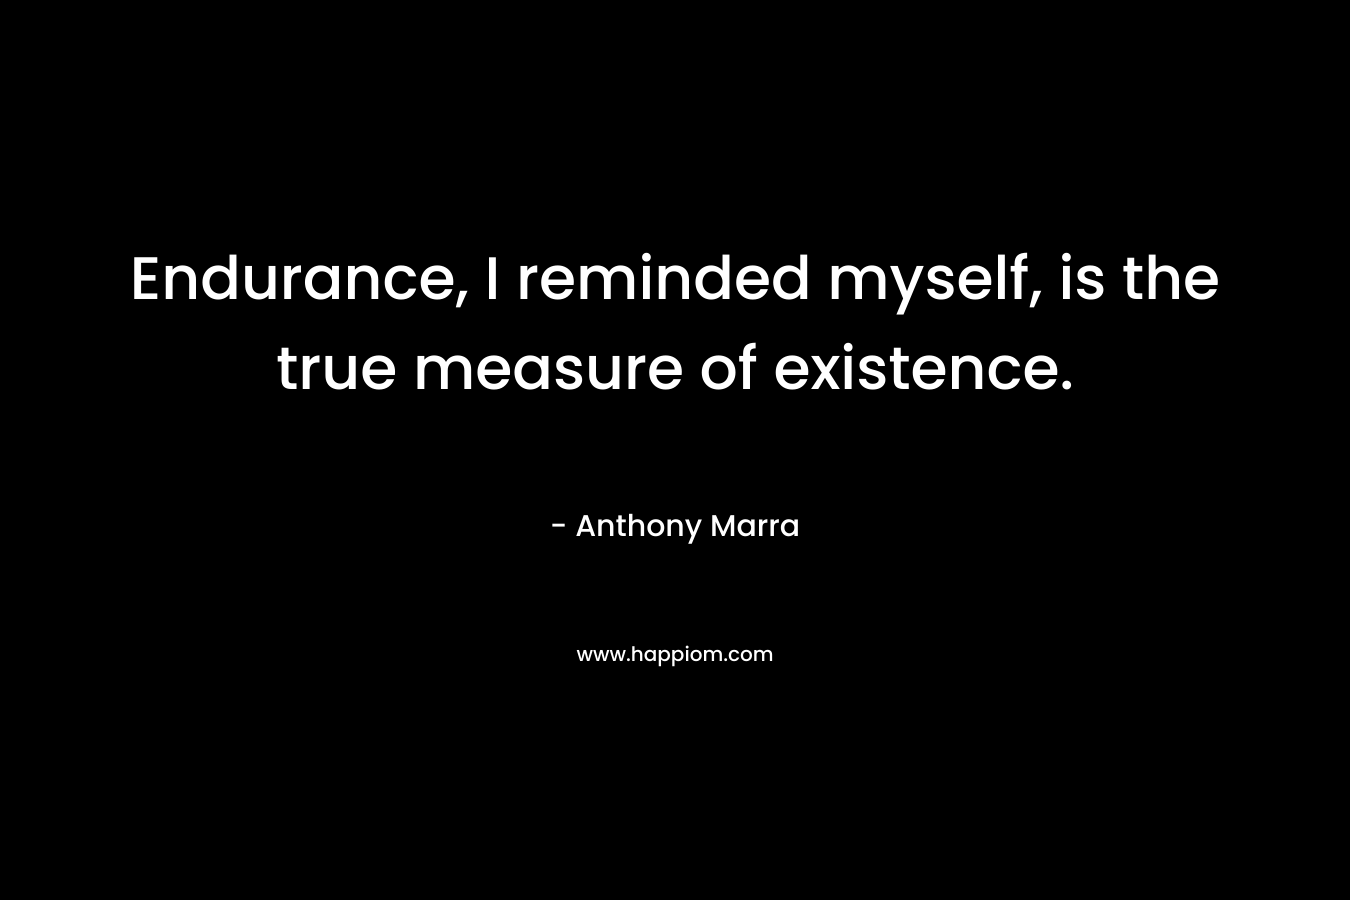 Endurance, I reminded myself, is the true measure of existence. – Anthony Marra